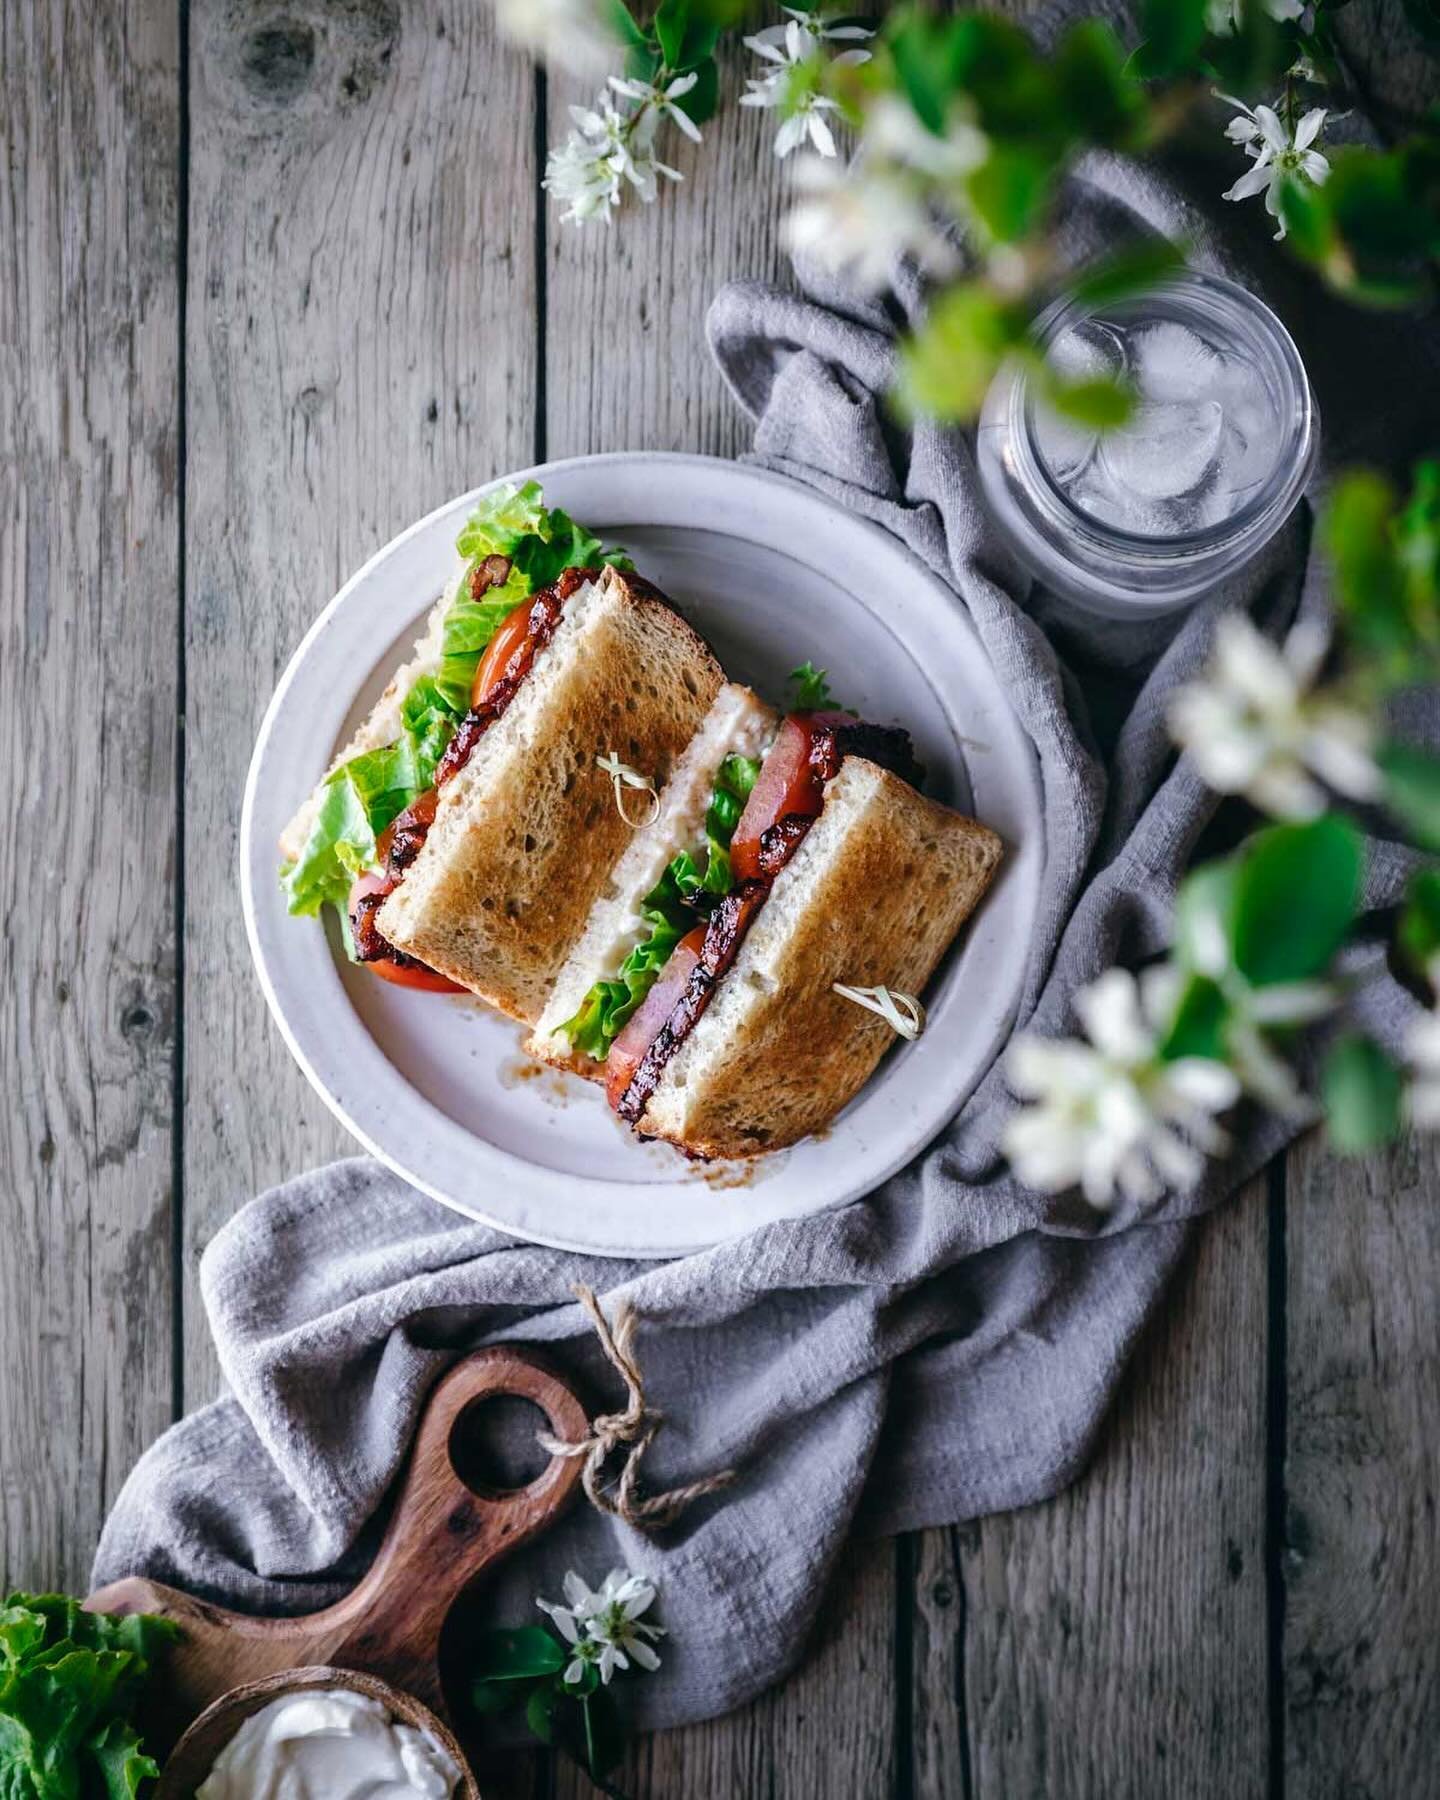 NEW ✨Homemade Vegan BLT with Maple Tempeh Bacon! 🥓 I&rsquo;ve been kind of obsessed with this sandwich lately and for good reason...it tastes *just* like the traditional BLTs I remember. RECIPE LINK BELOW!👇🏼 

🙌🏼 In fact, a meat-loving friend ca